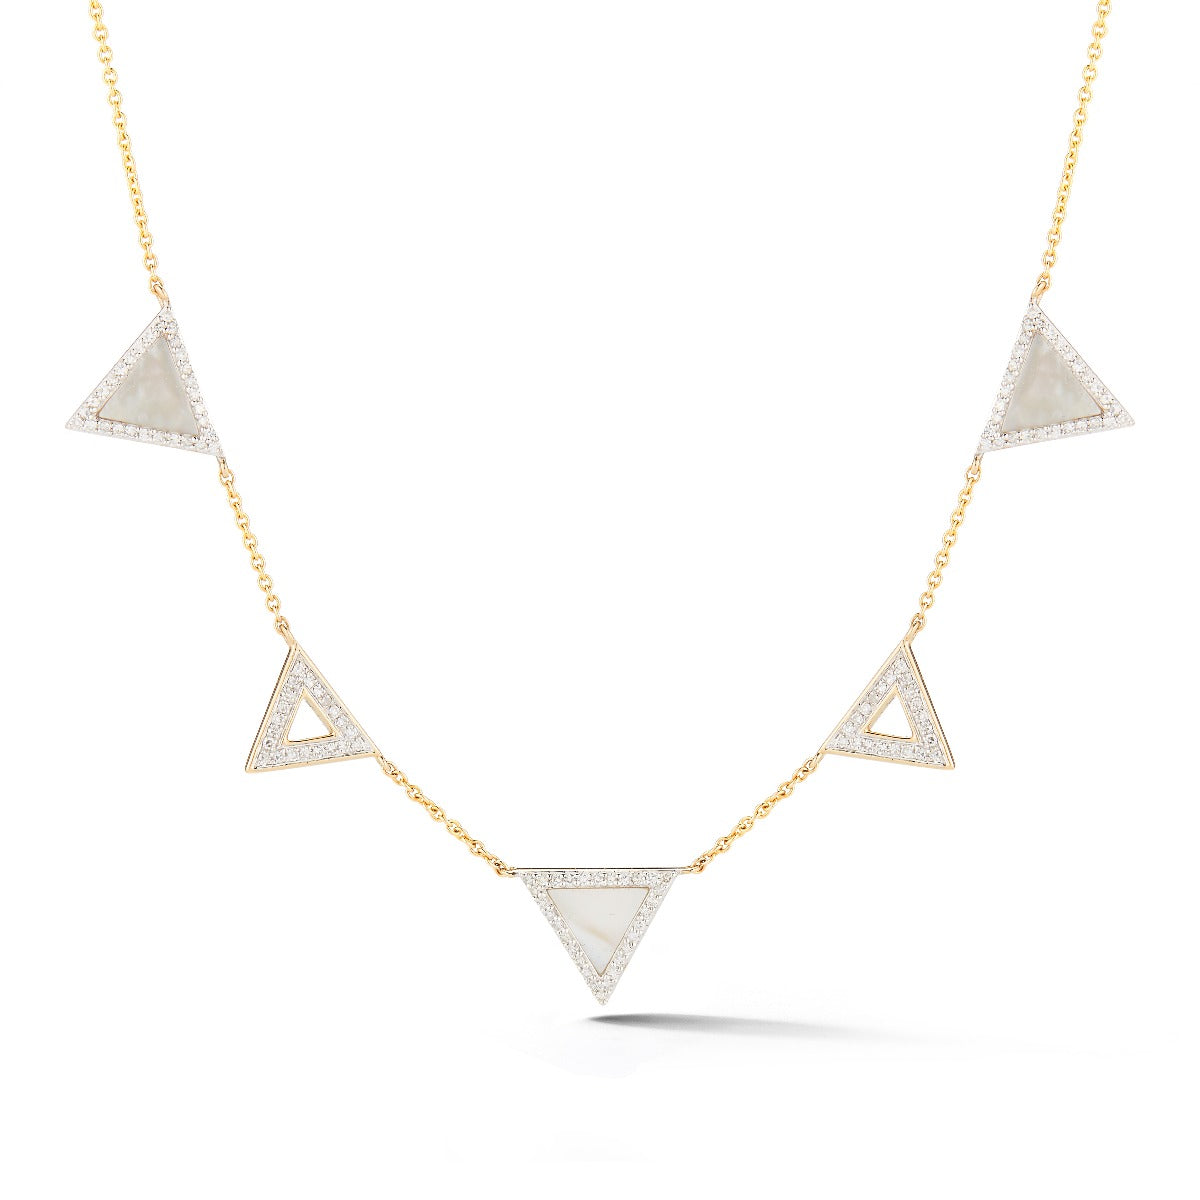 Trendy triangle necklace . Combines diamonds T.W 0.44ct along with M.O.P on 18 inches chain